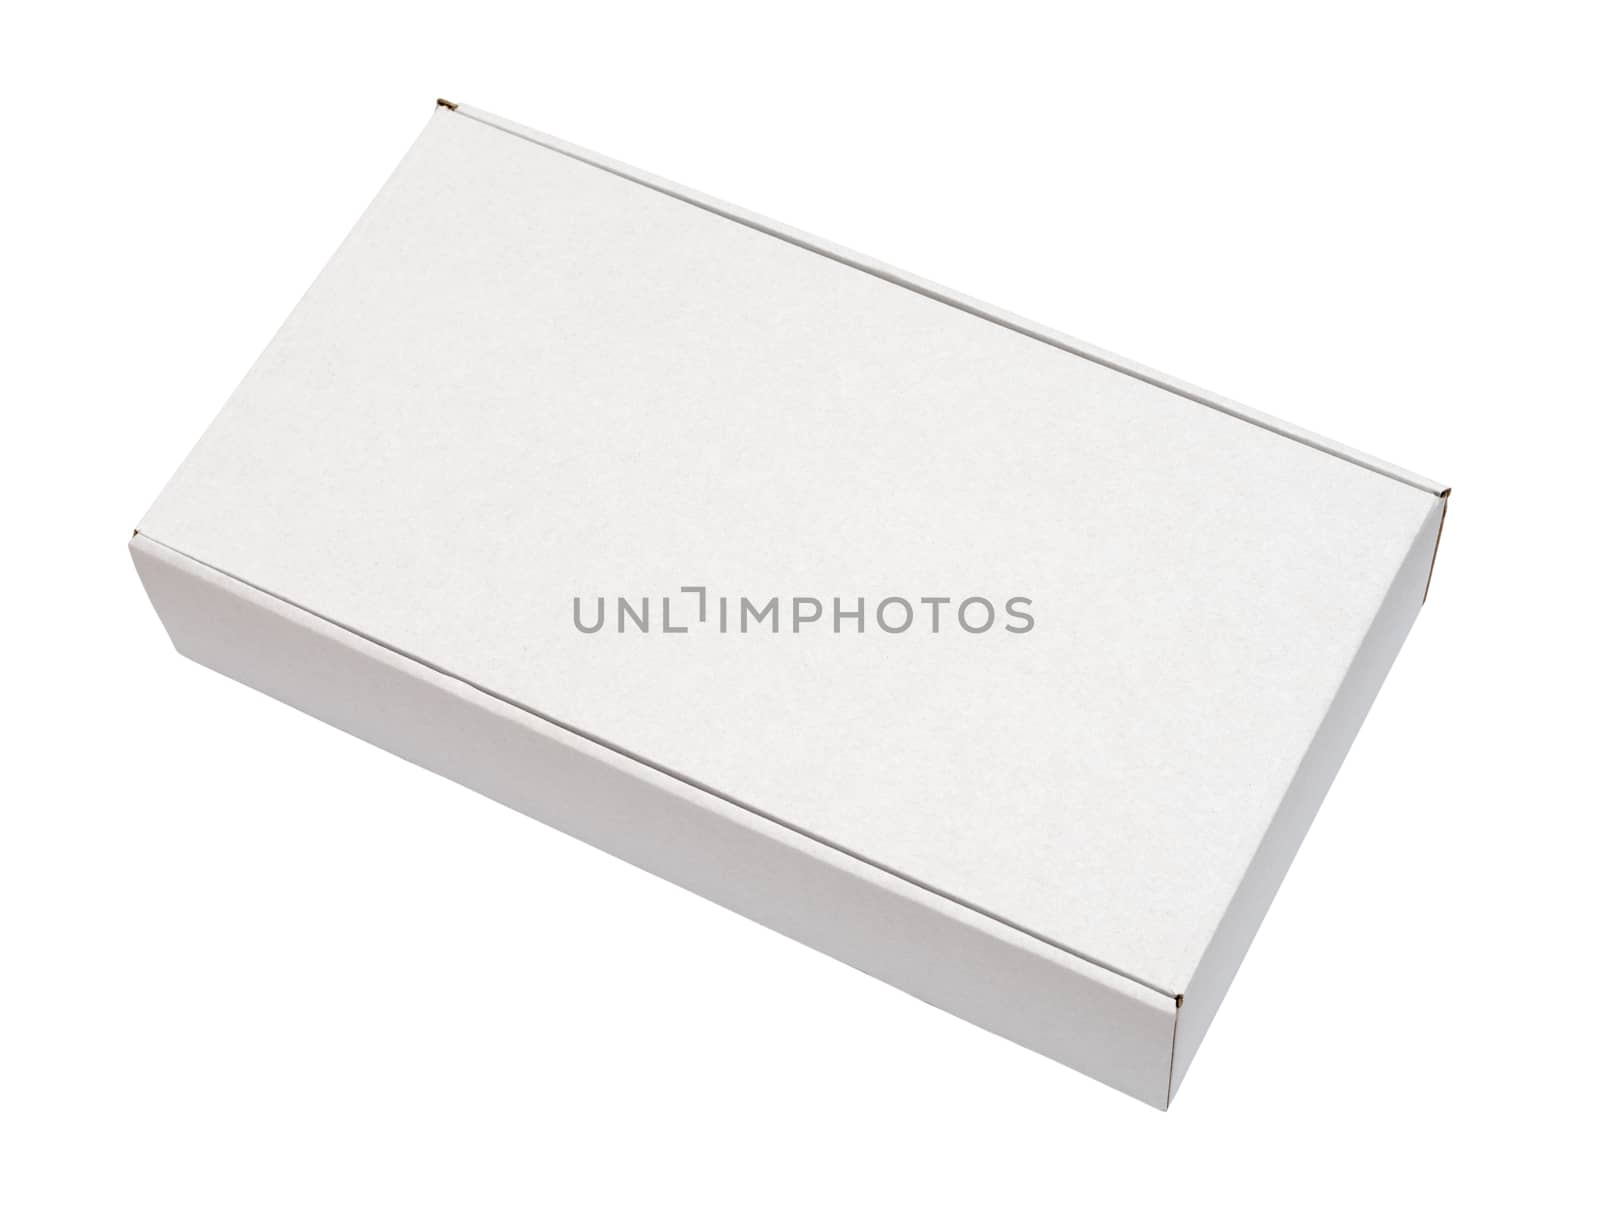 Blank white box isolated on white background by DNKSTUDIO